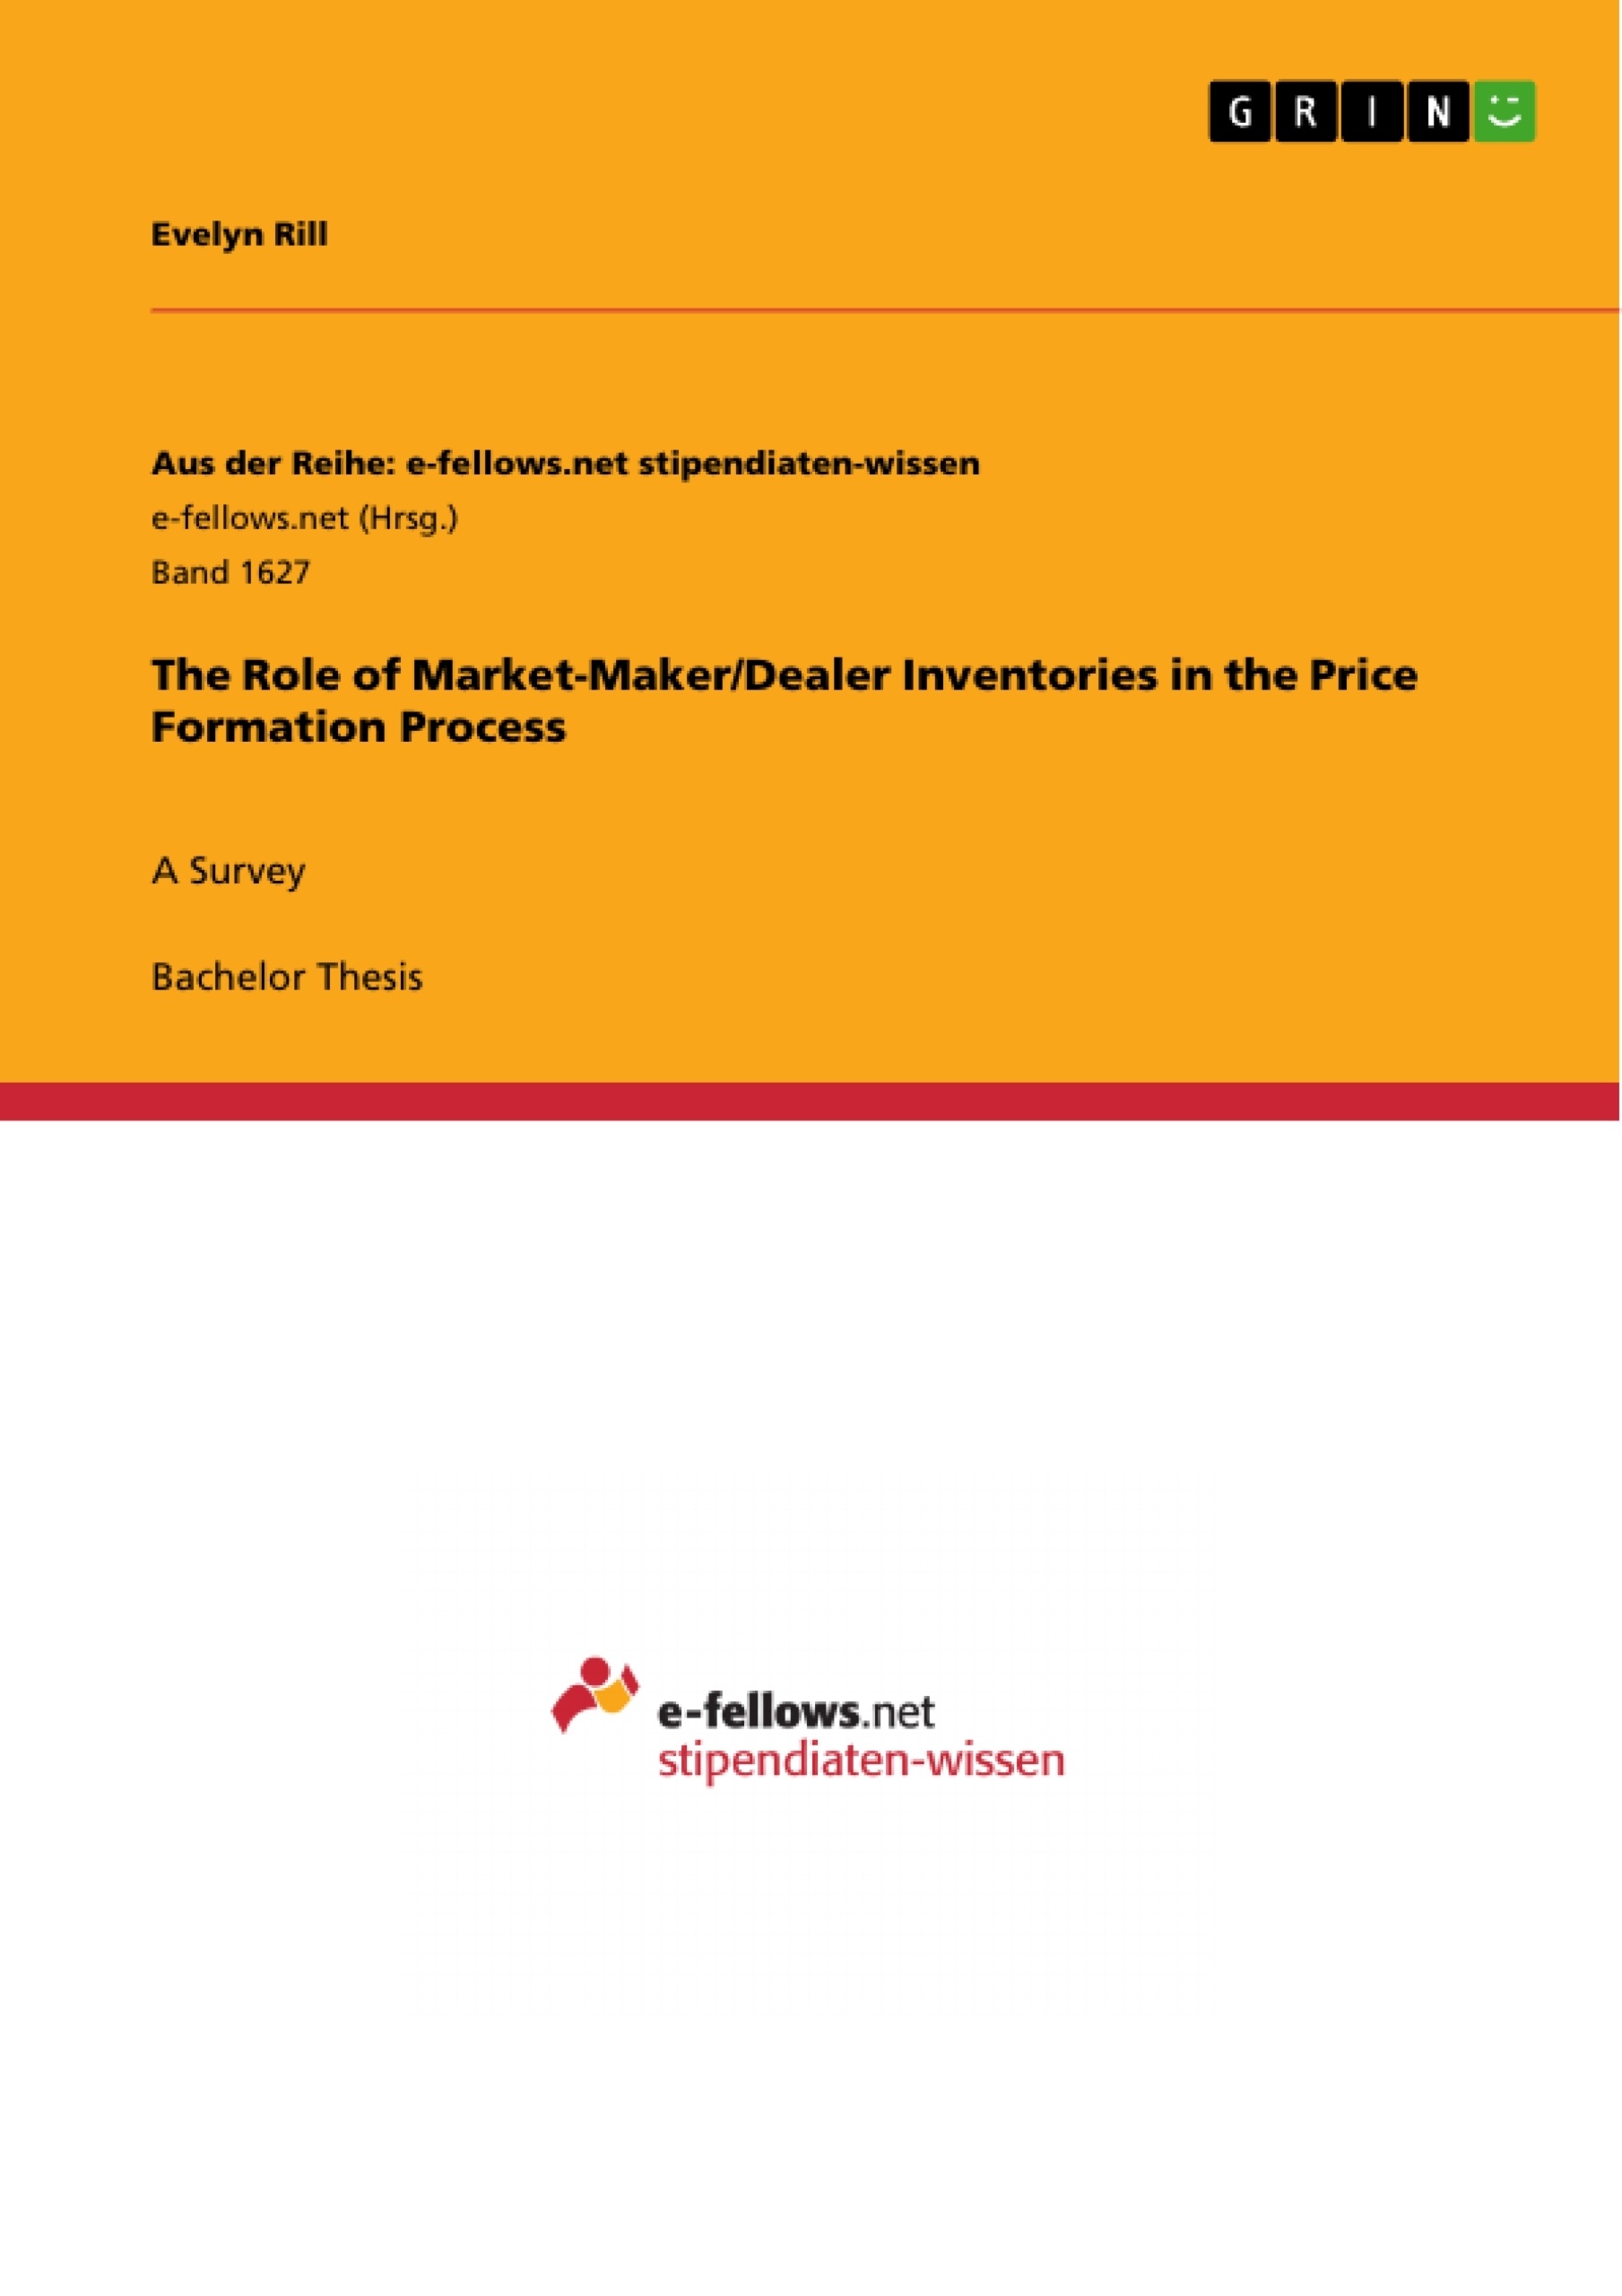 Titel: The Role of Market-Maker/Dealer Inventories in the Price Formation Process